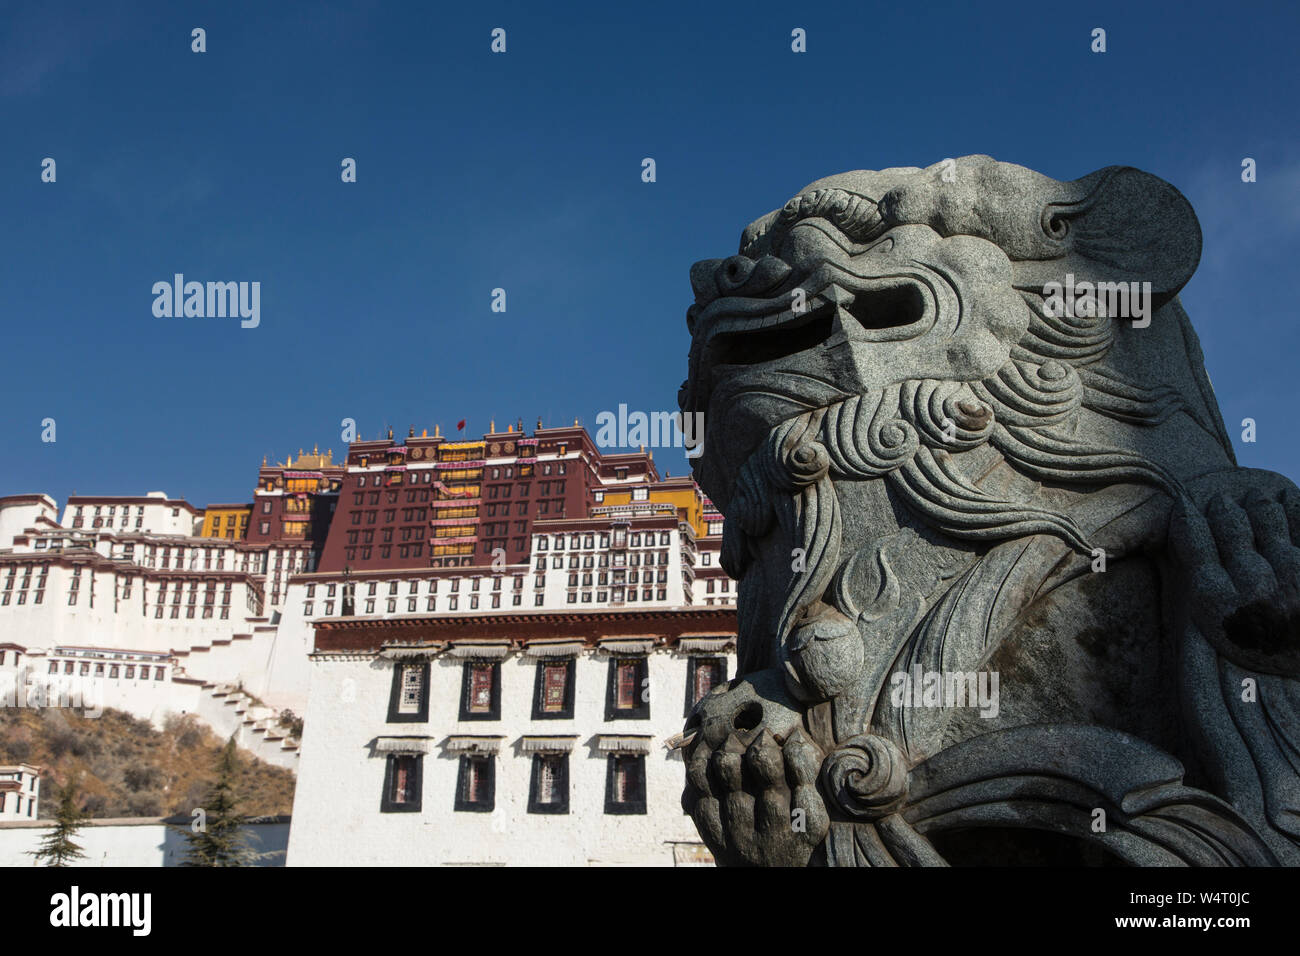 China, Tibet, Lhasa, A carved stone lion statue in front of the Potala Palace  founded about 1645 AD and was the former summer palace of the Dalai Lama and is a part of the Historic Ensemble a UNESCO World Heritage Site. Stock Photo